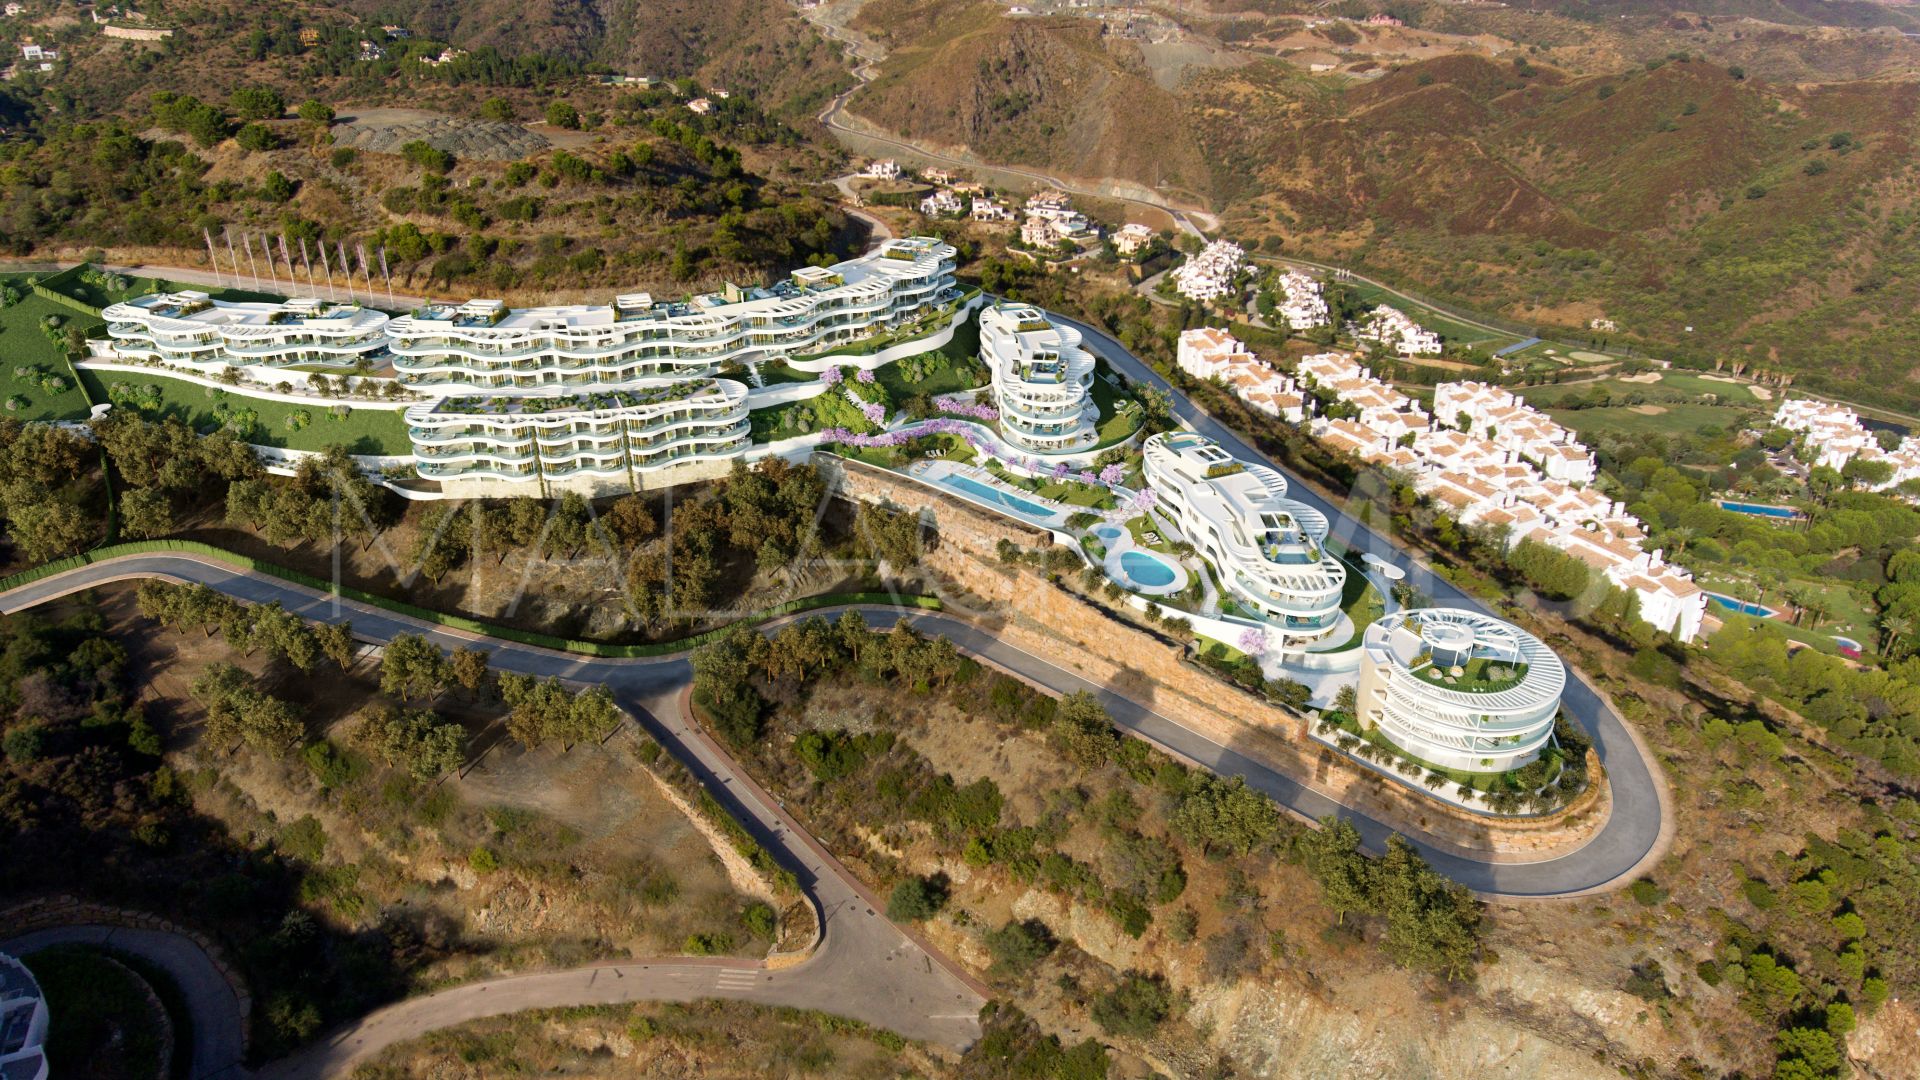 The View Marbella, apartamento with 3 bedrooms for sale